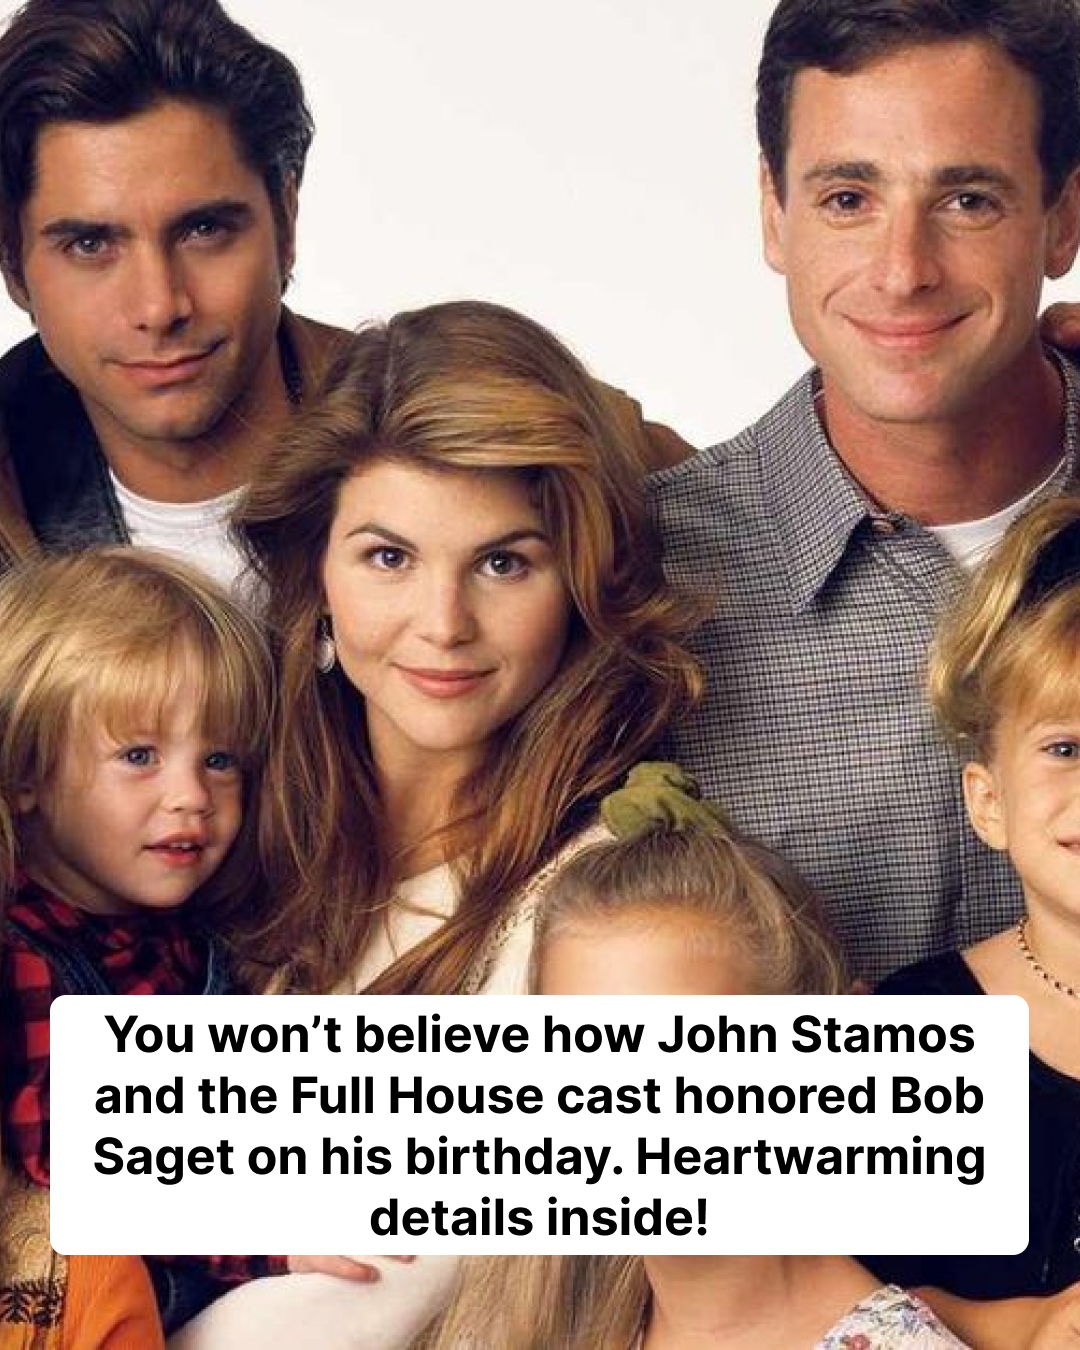 John Stamos’ Birthday Tribute to Bob Saget Features ‘Full House’ Reunion with Mary-Kate and Ashley Olsen